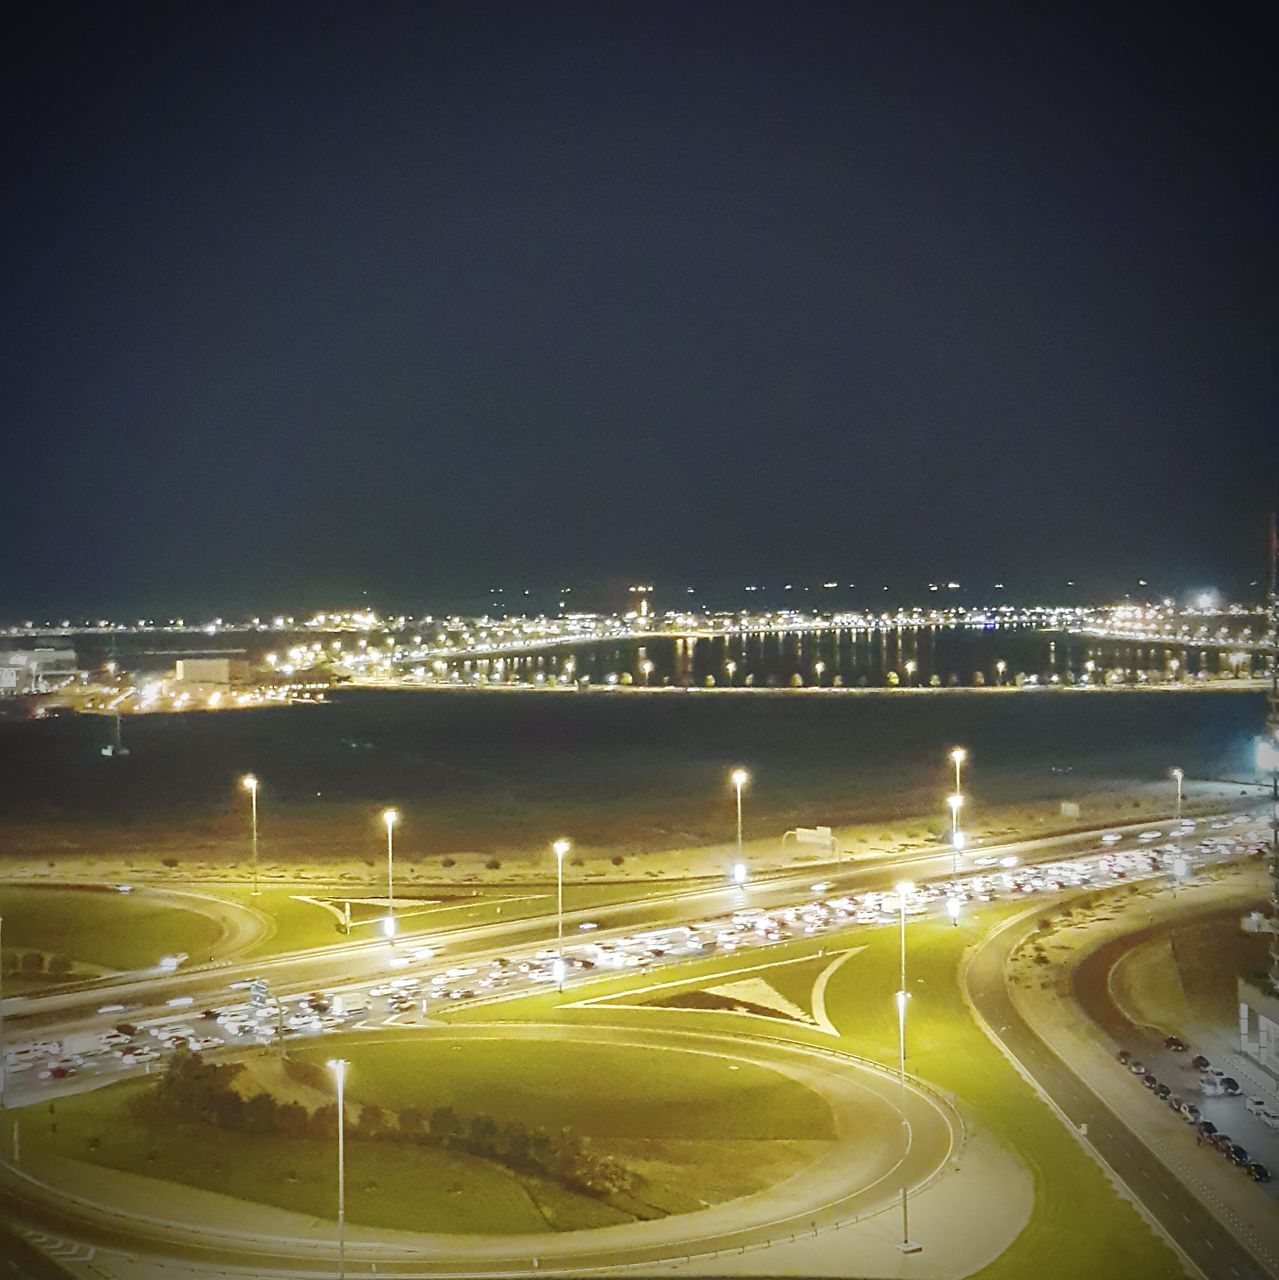 illuminated, night, city, connection, transportation, built structure, architecture, bridge - man made structure, high angle view, road, light trail, street light, clear sky, copy space, river, cityscape, sky, outdoors, bridge, engineering